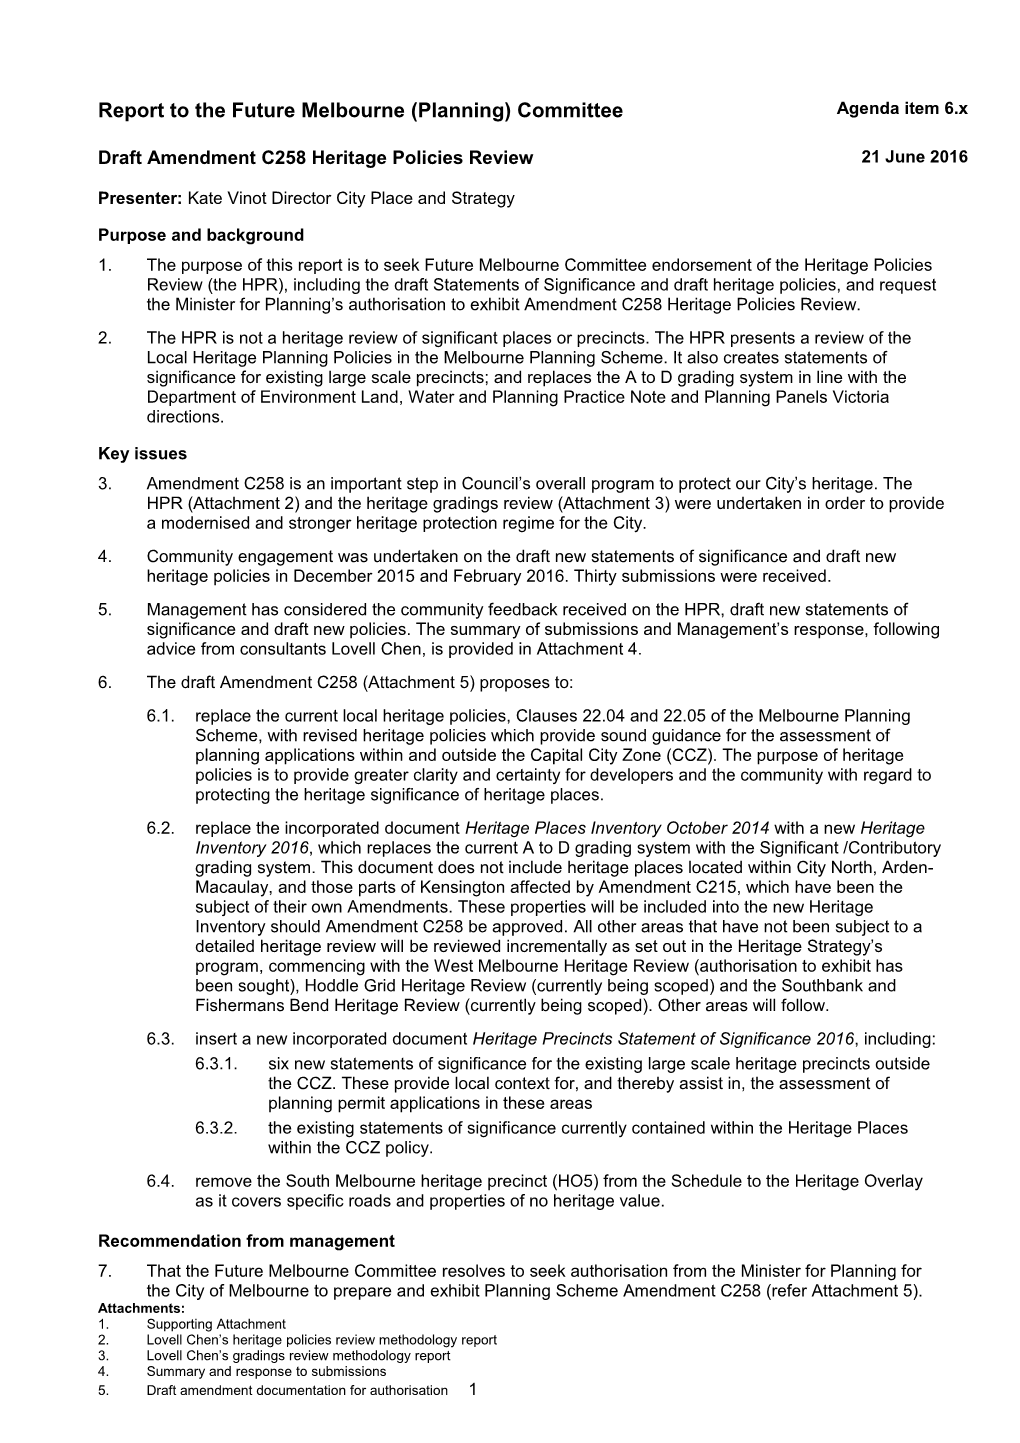 Report to the Future Melbourne (Planning) Committee - Draft Amendment C258 Heritage Policies